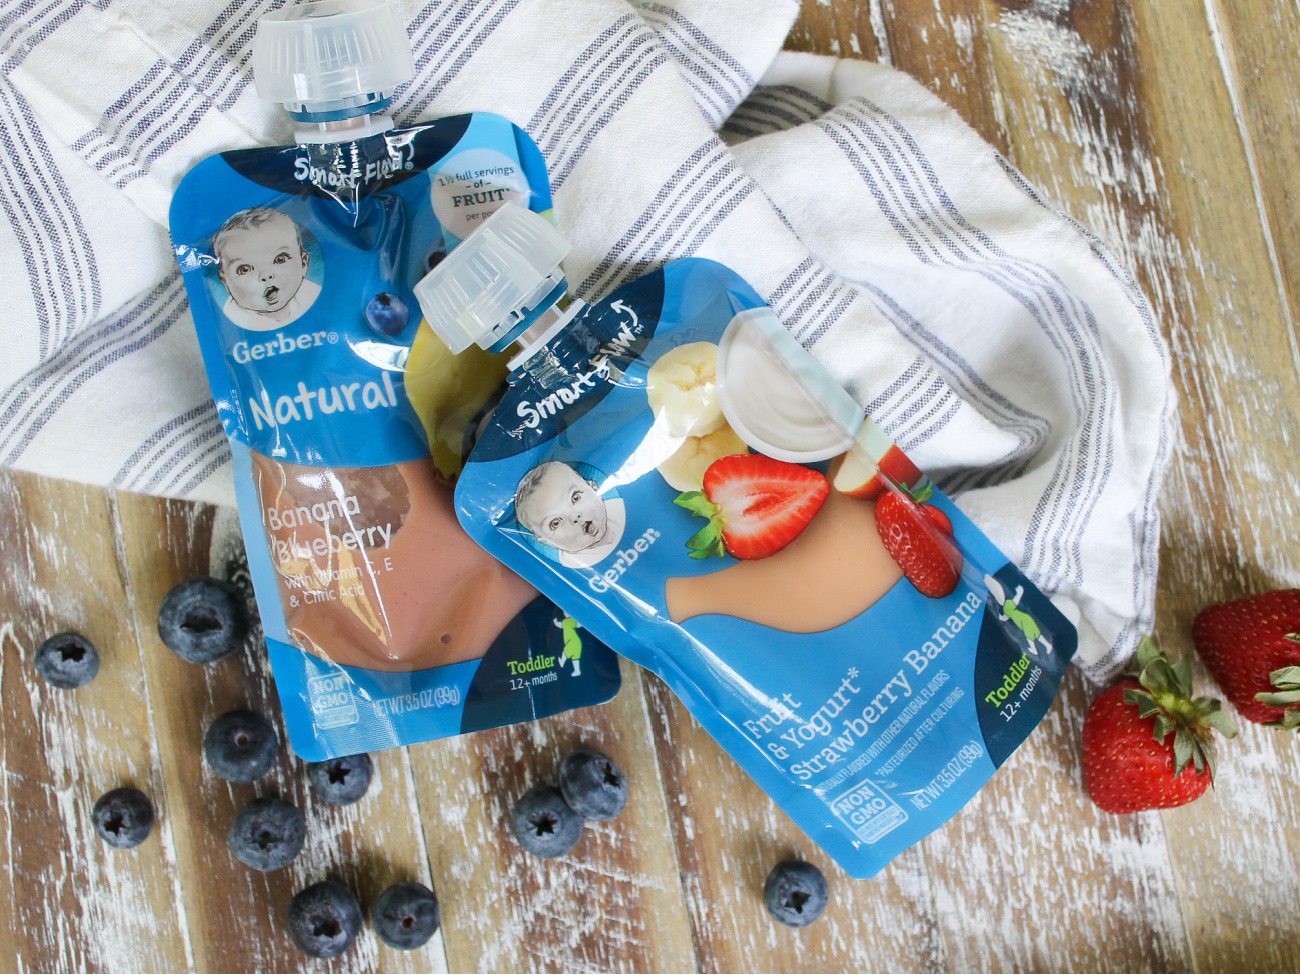 Get Gerber Pouches For Just $1.25 Per Pouch At Kroger